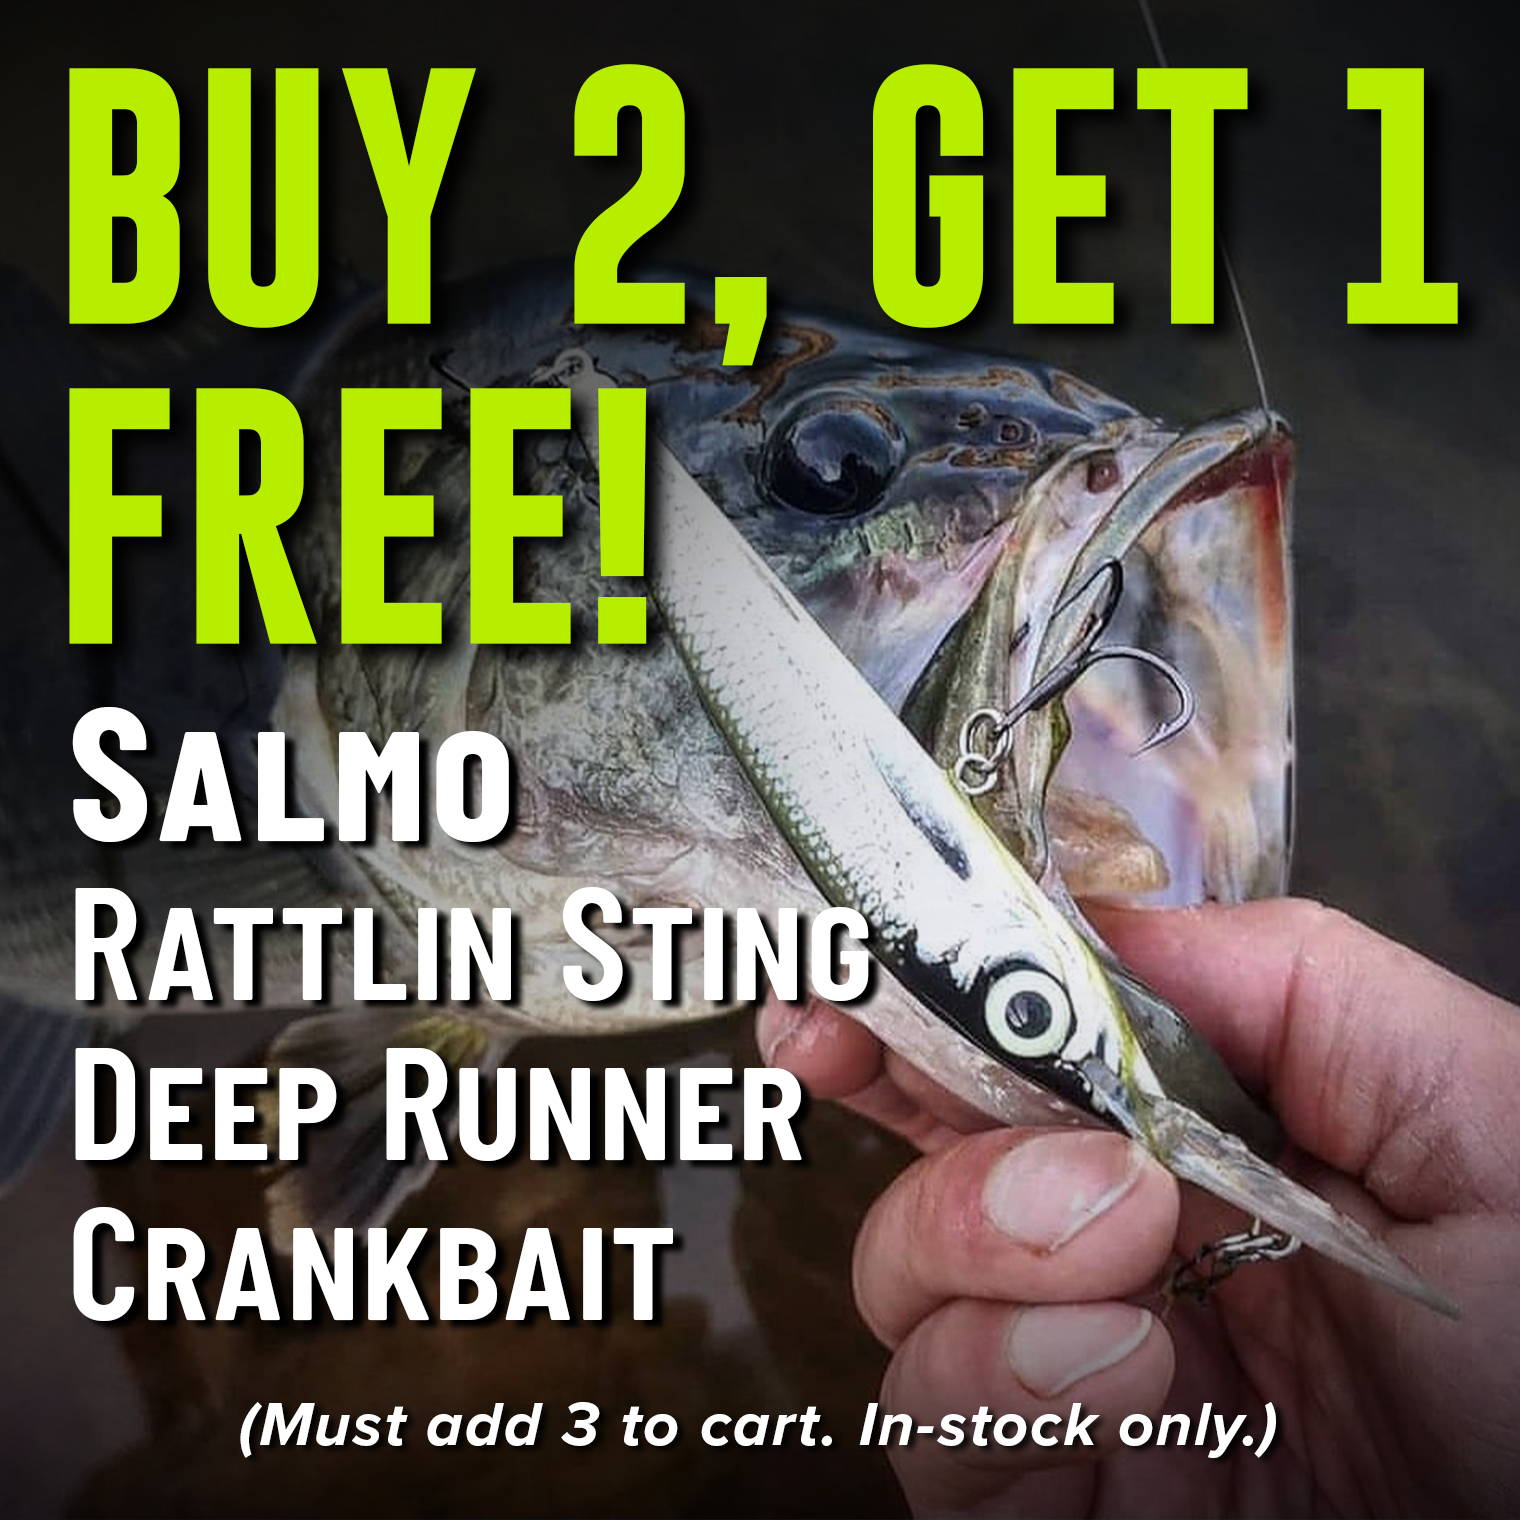 Buy 2, Get 1 Free! Salmo Rattlin Sting Deep Runner Crankbait (Must add 3 to cart. In-stock only.)